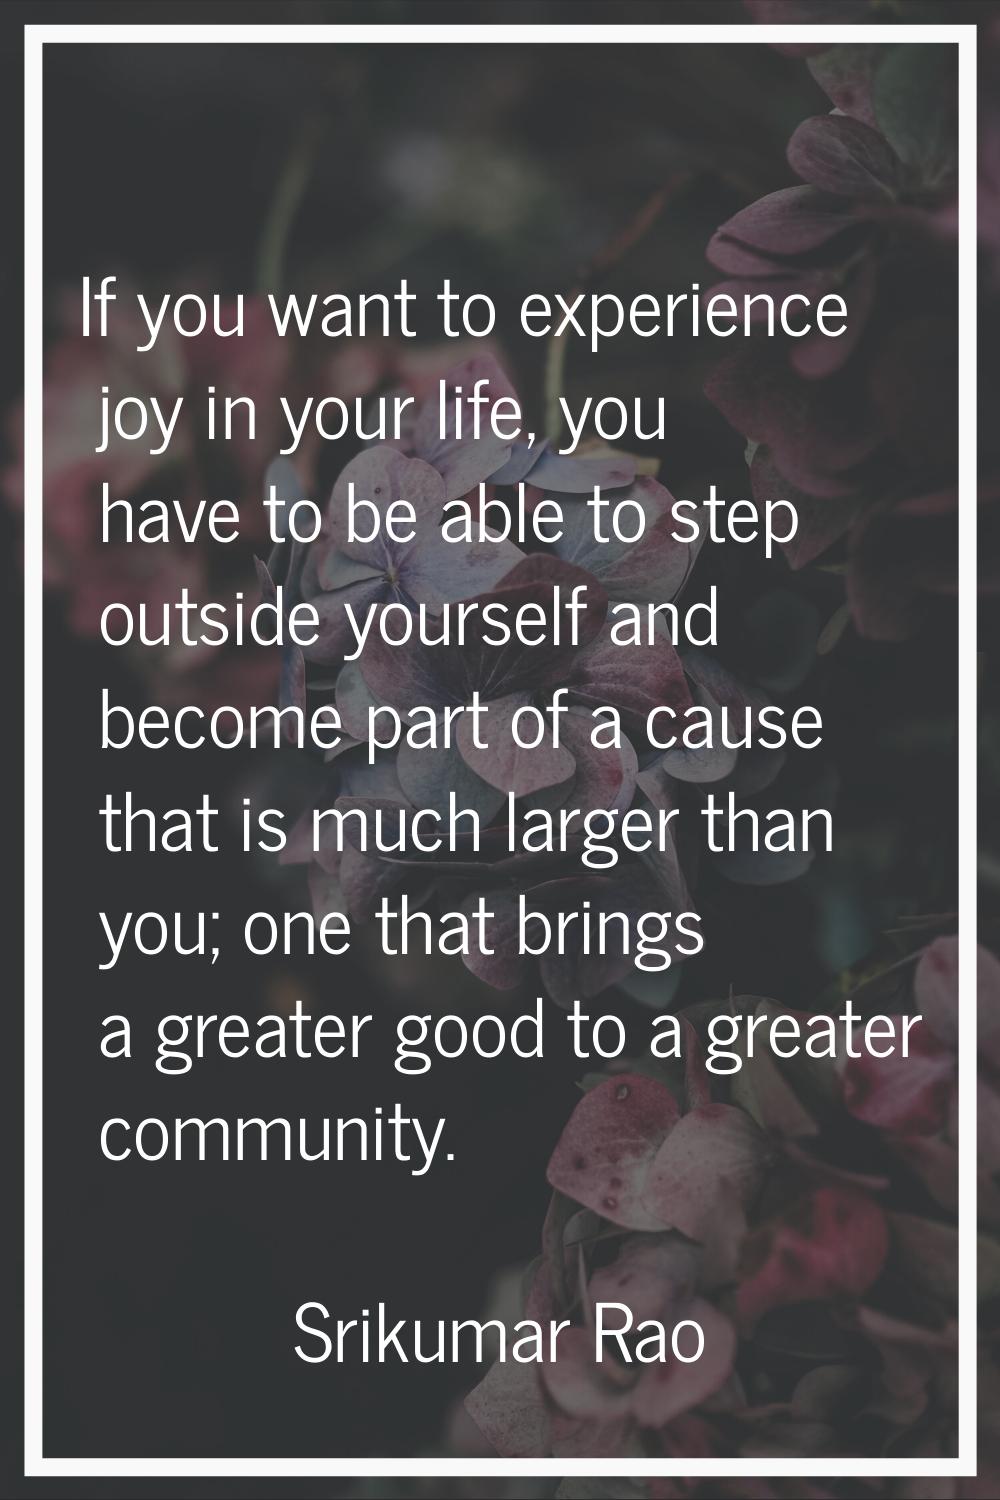 If you want to experience joy in your life, you have to be able to step outside yourself and become